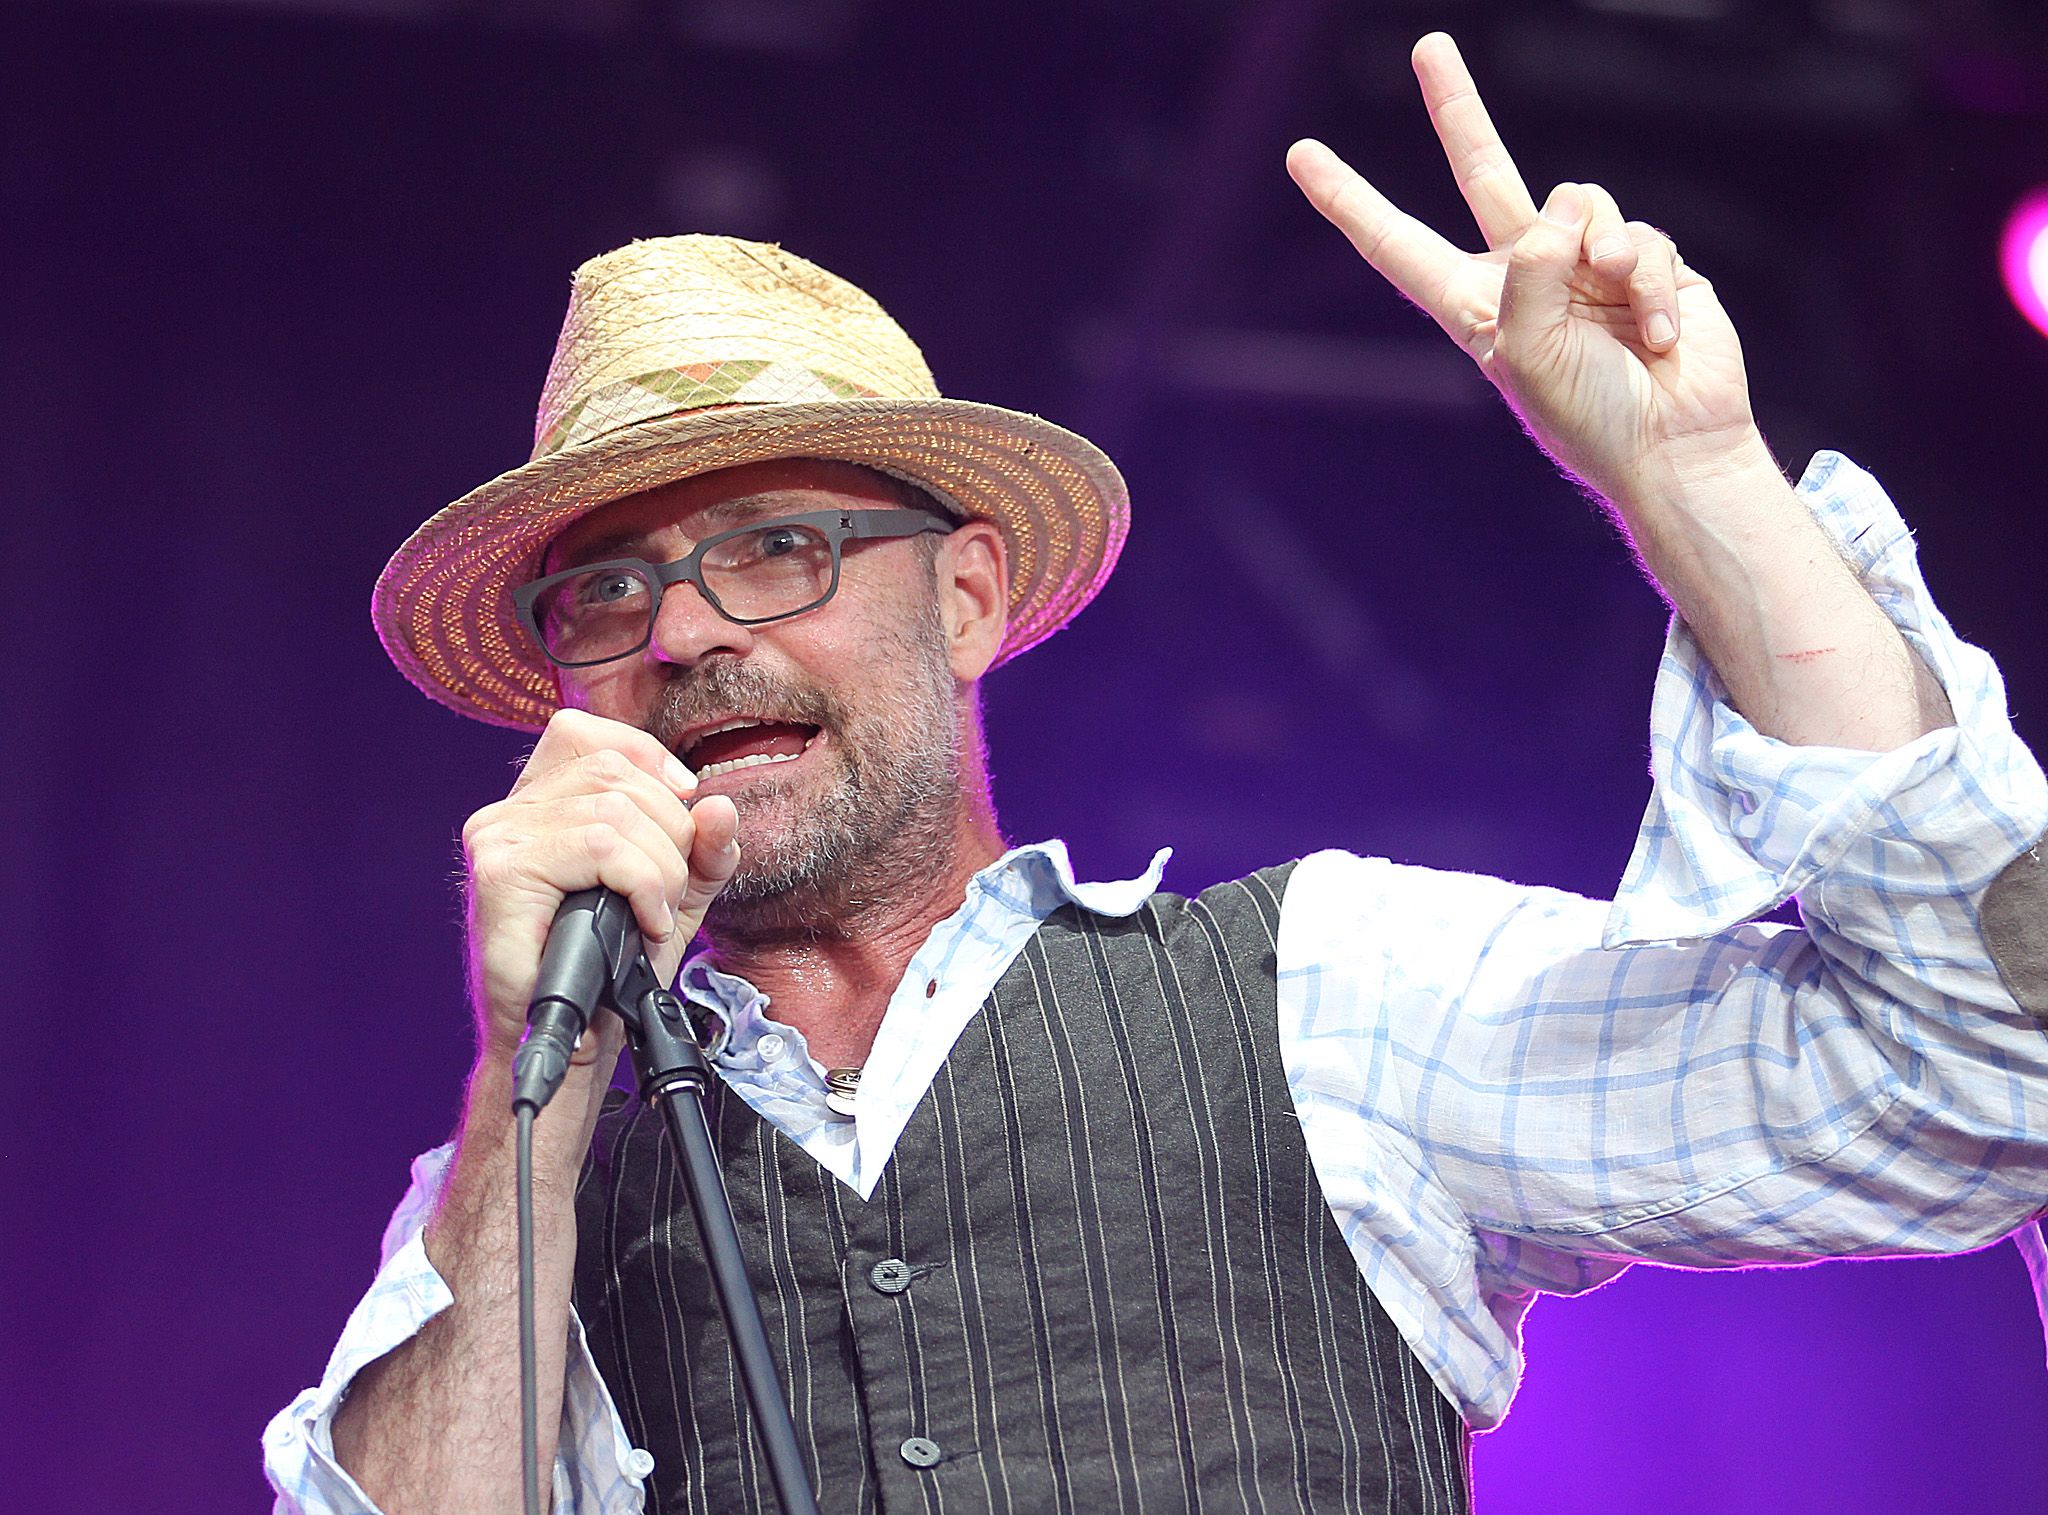 Gord Downie, of the Tragically Hip, died of glioblastoma in 2017. Here he performs in Winnipeg Thursday July 07, 2011. BRIAN DONOGH/WINNIPEG SUN/QMI AGENCY